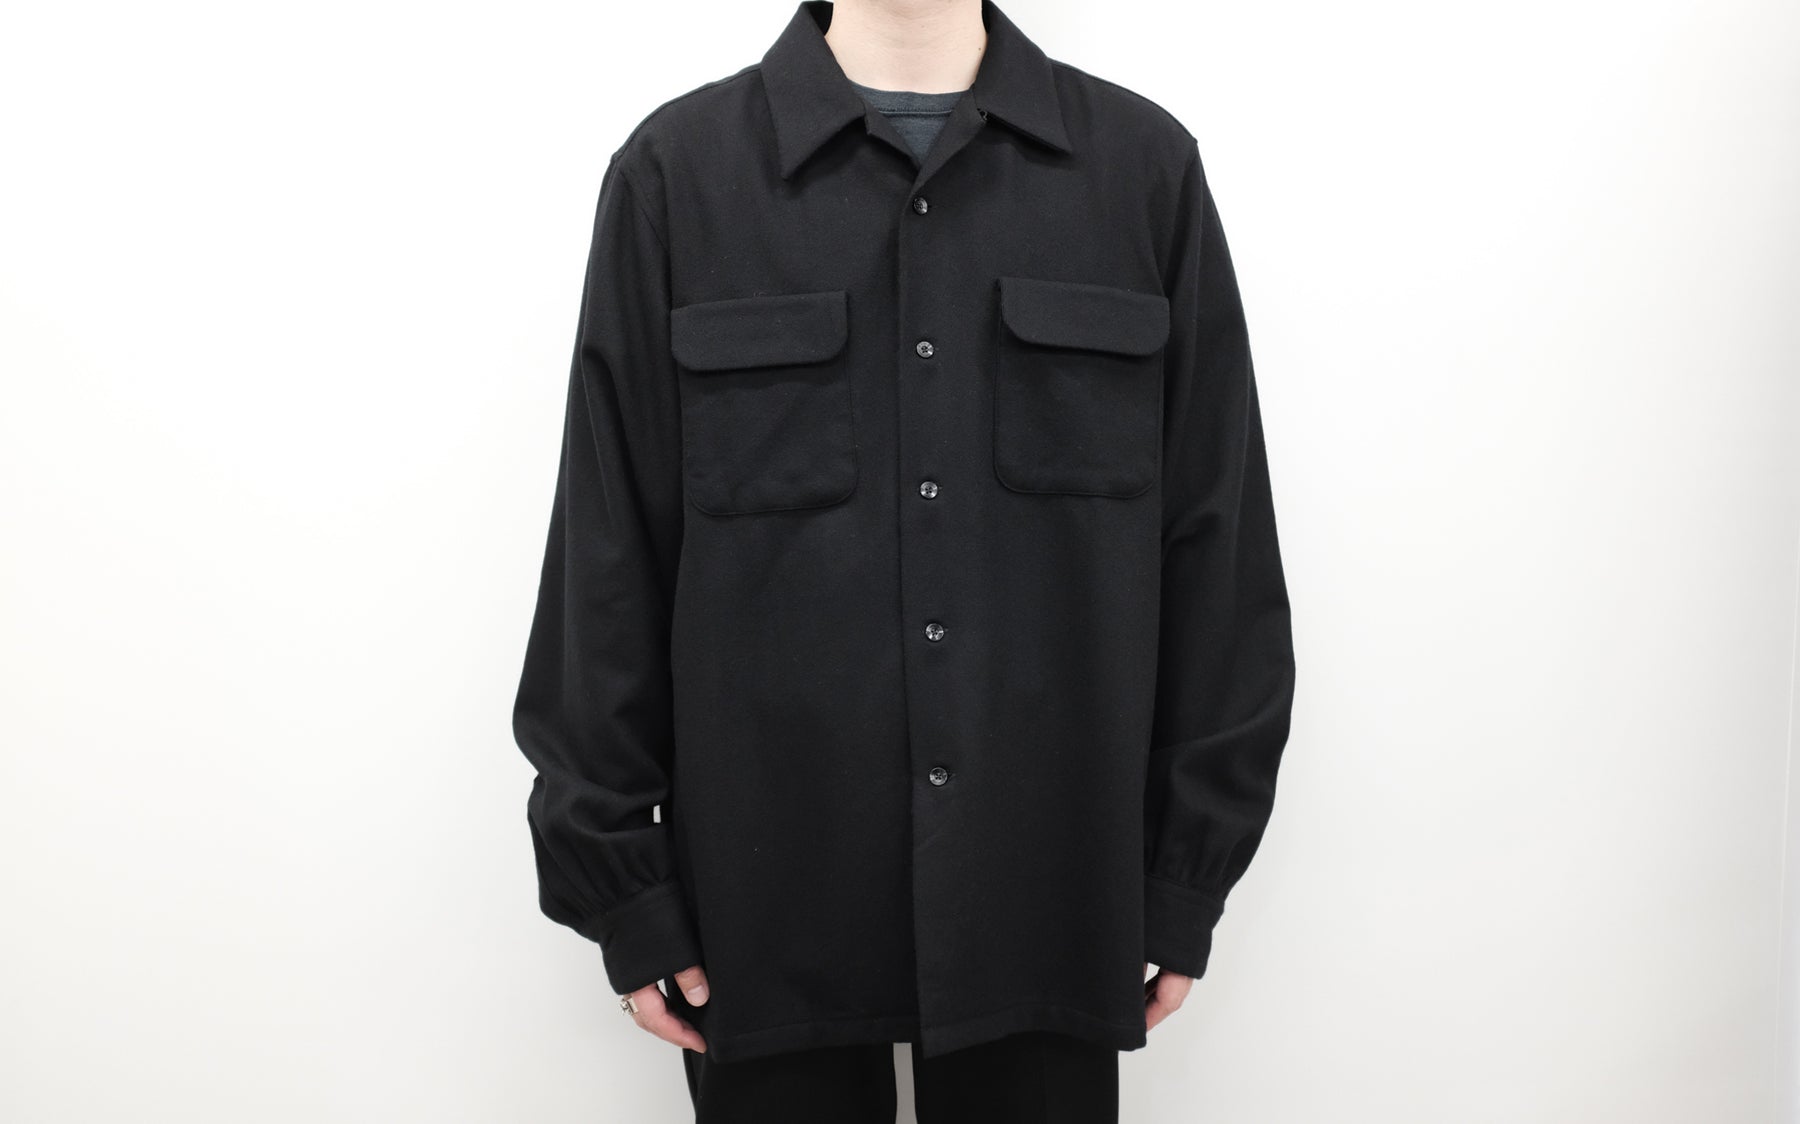 <span style="color: #ff2a00;">Last One</span> WILLY CHAVARRIA / MADERA WOOLEN SHIRT BLACK SHOW PIECE